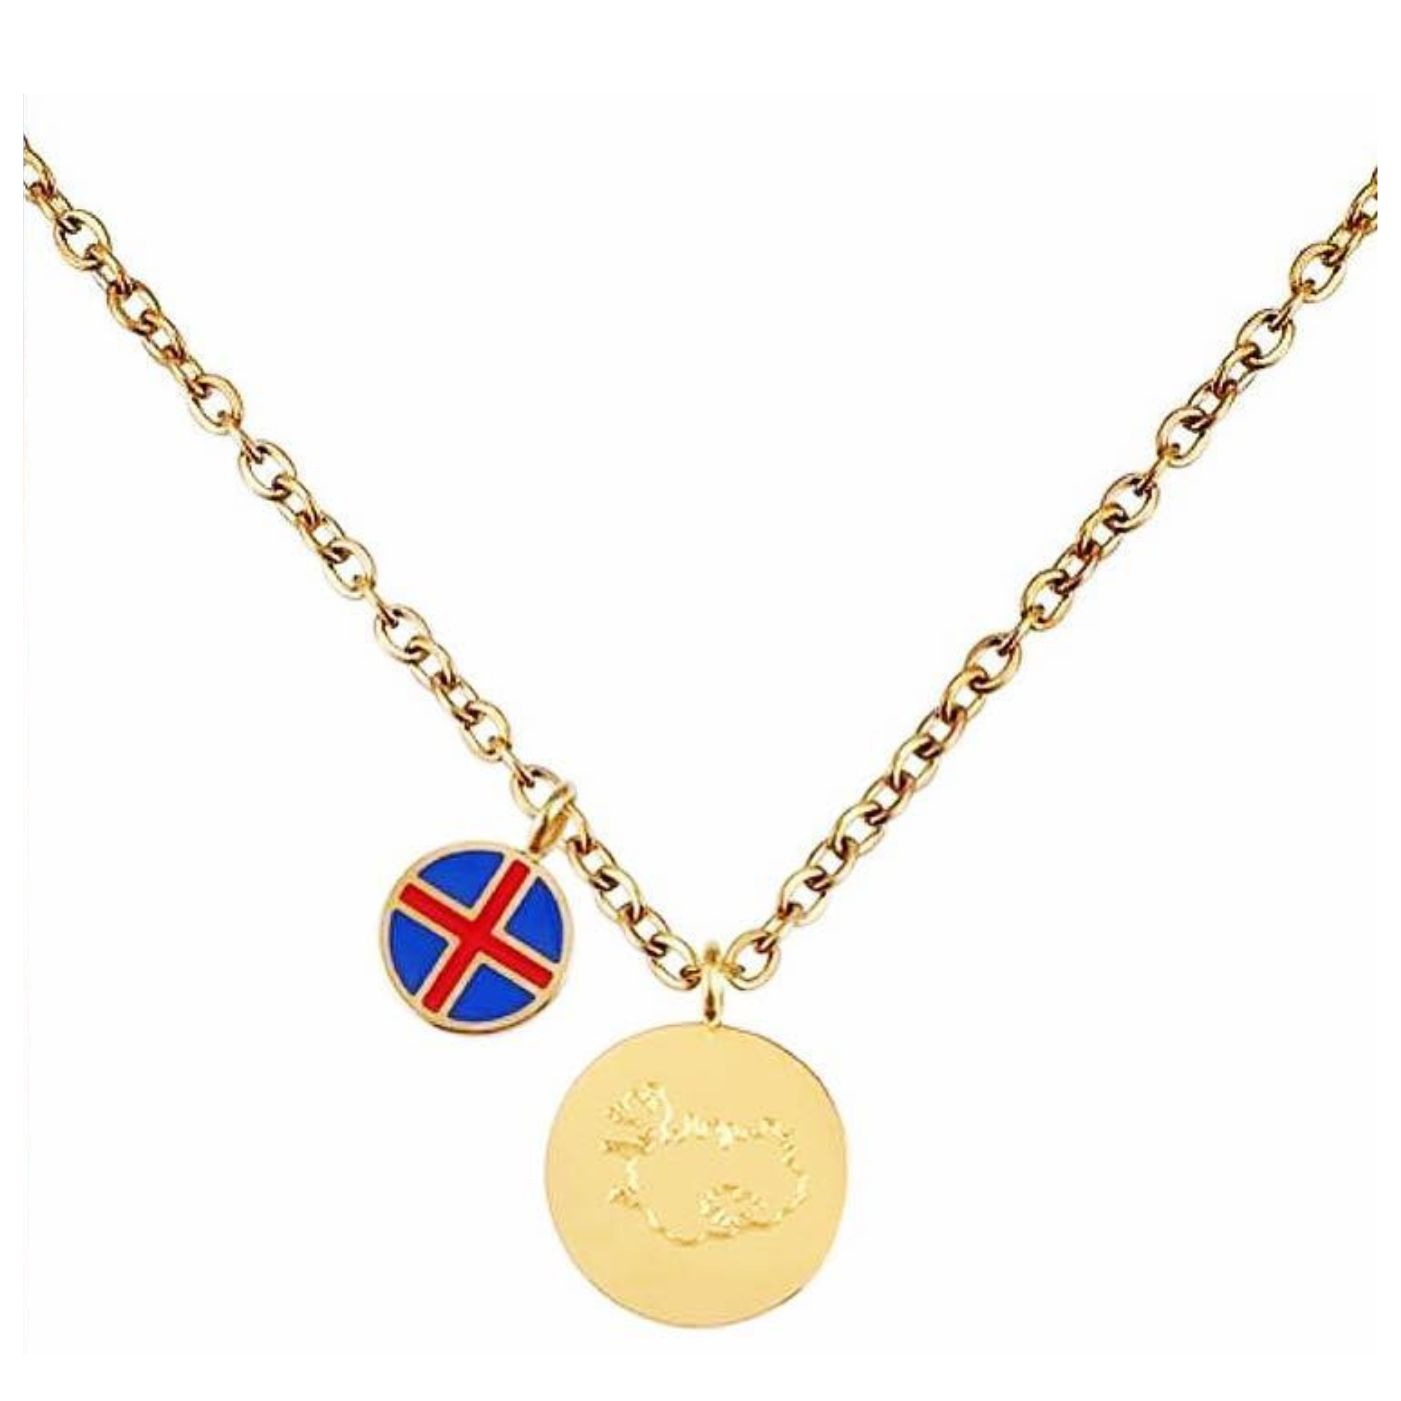 Iceland with flag necklase